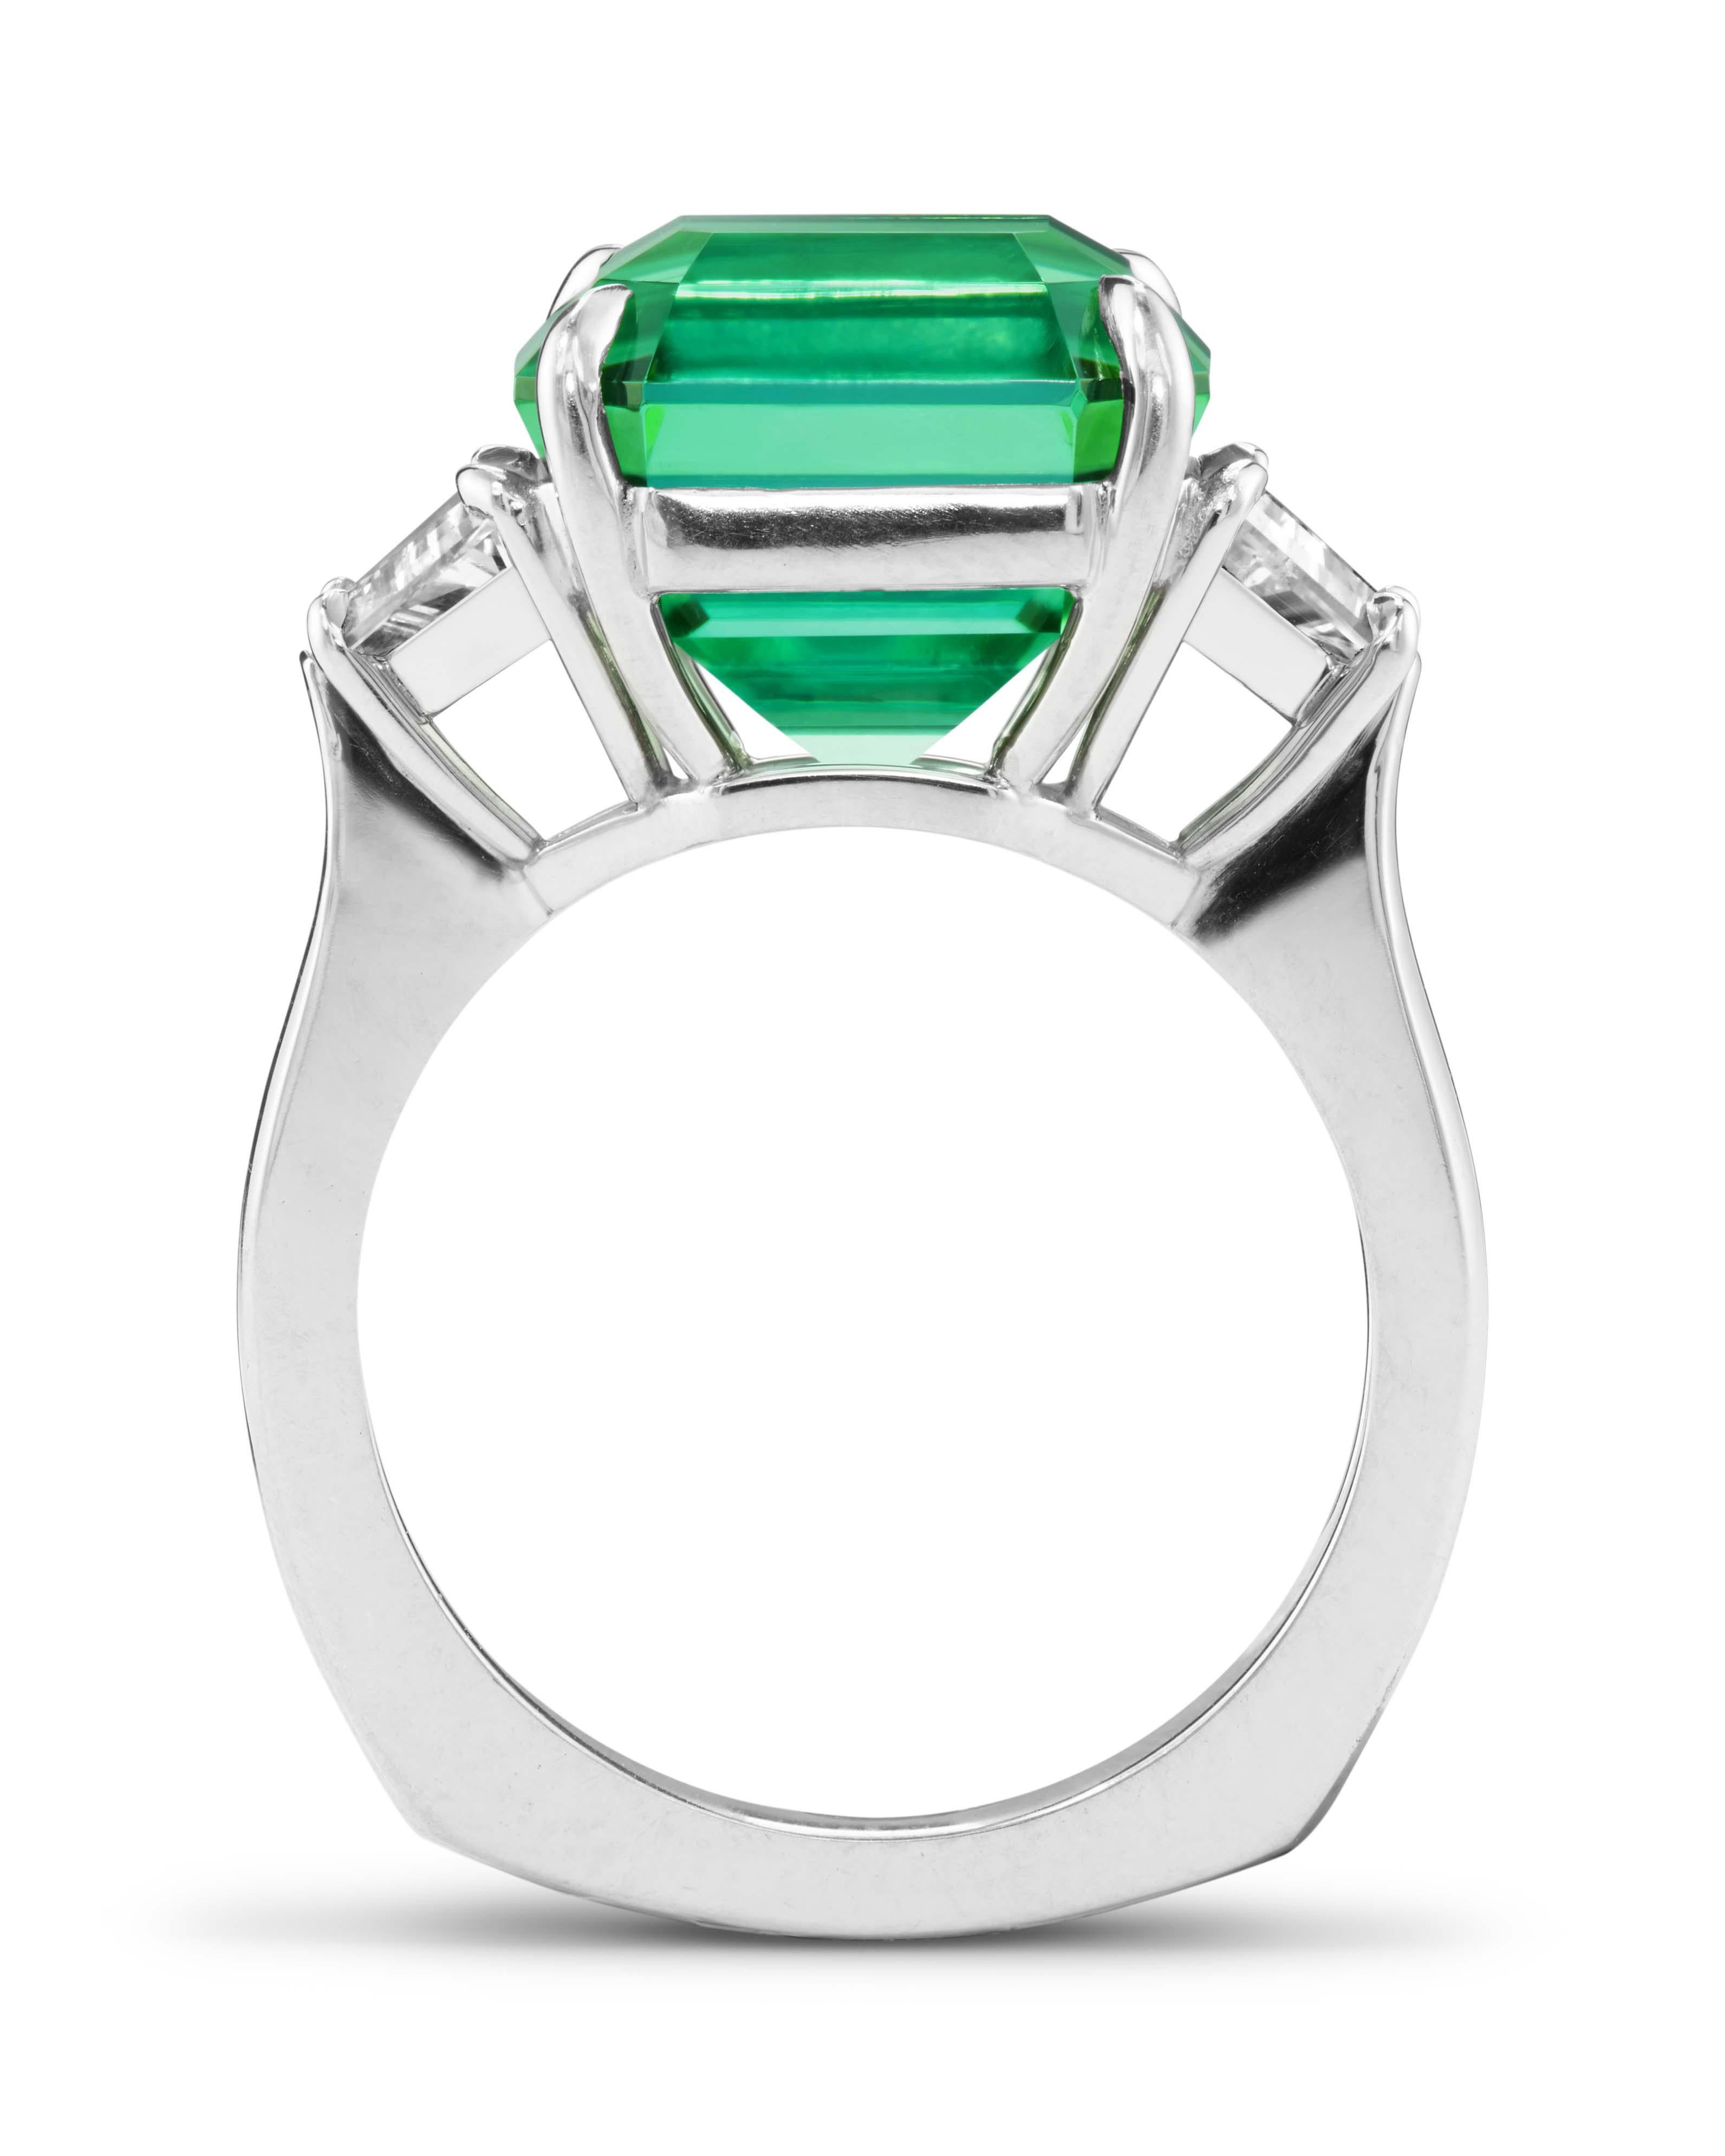 From our One-of-a-Kind collection, the main stone is a 10.23 ct. asscher-cut vibrant mint green Tourmaline. It is flanked by two trapeze-cut diamonds (0.50 ct. E SI1 and 0.41 ct. E SI1). All stones are GIA certified. The ring is handcrafted in